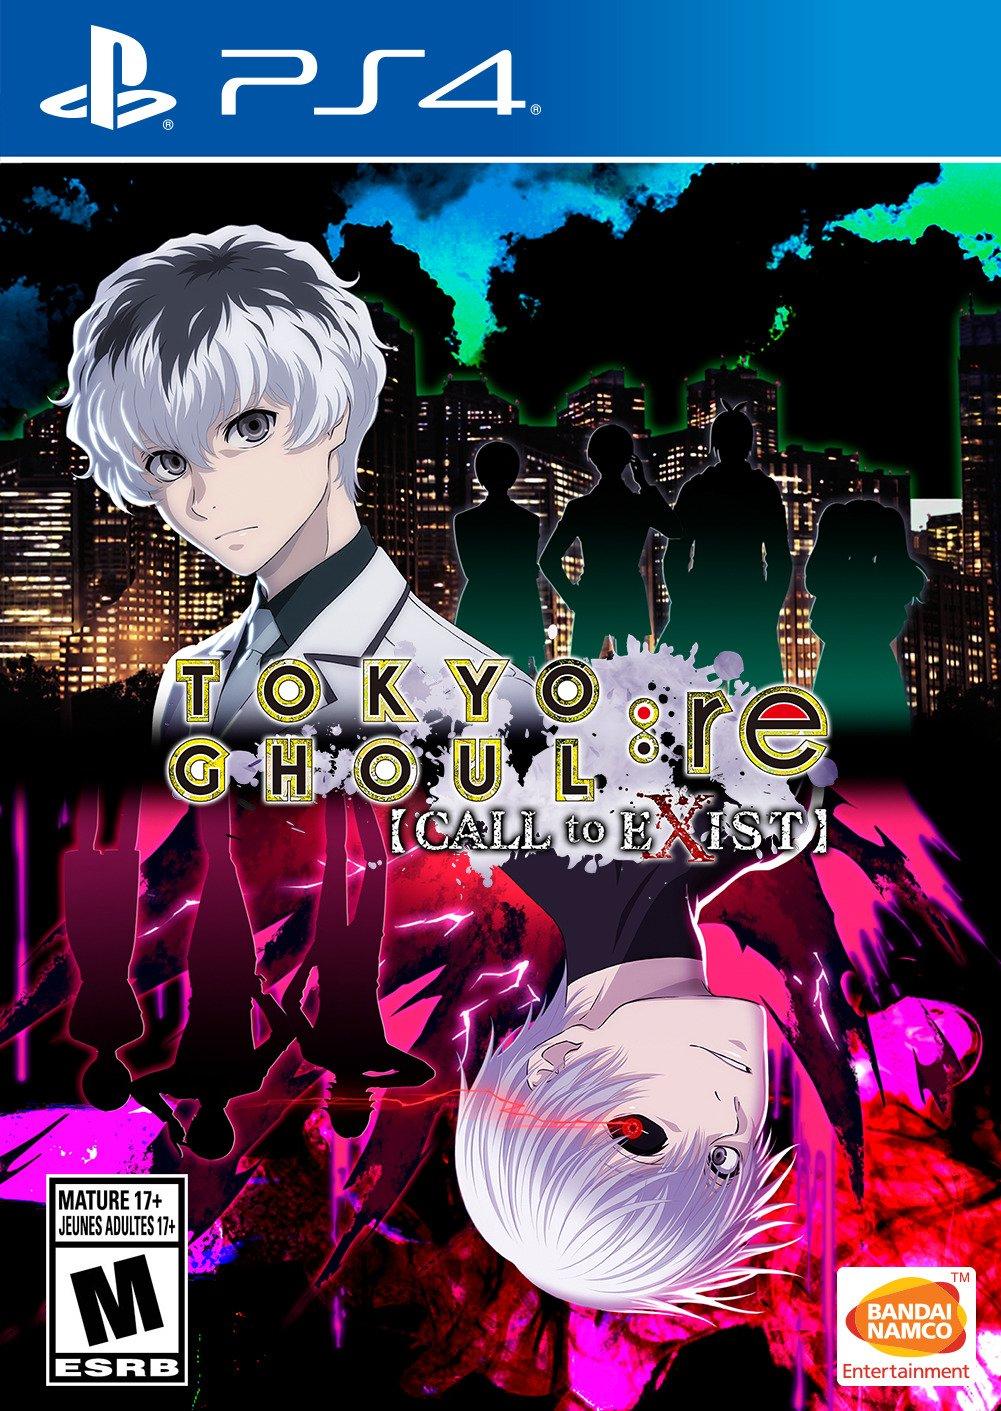 TOKYO GHOUL: re [CALL to EXIST]